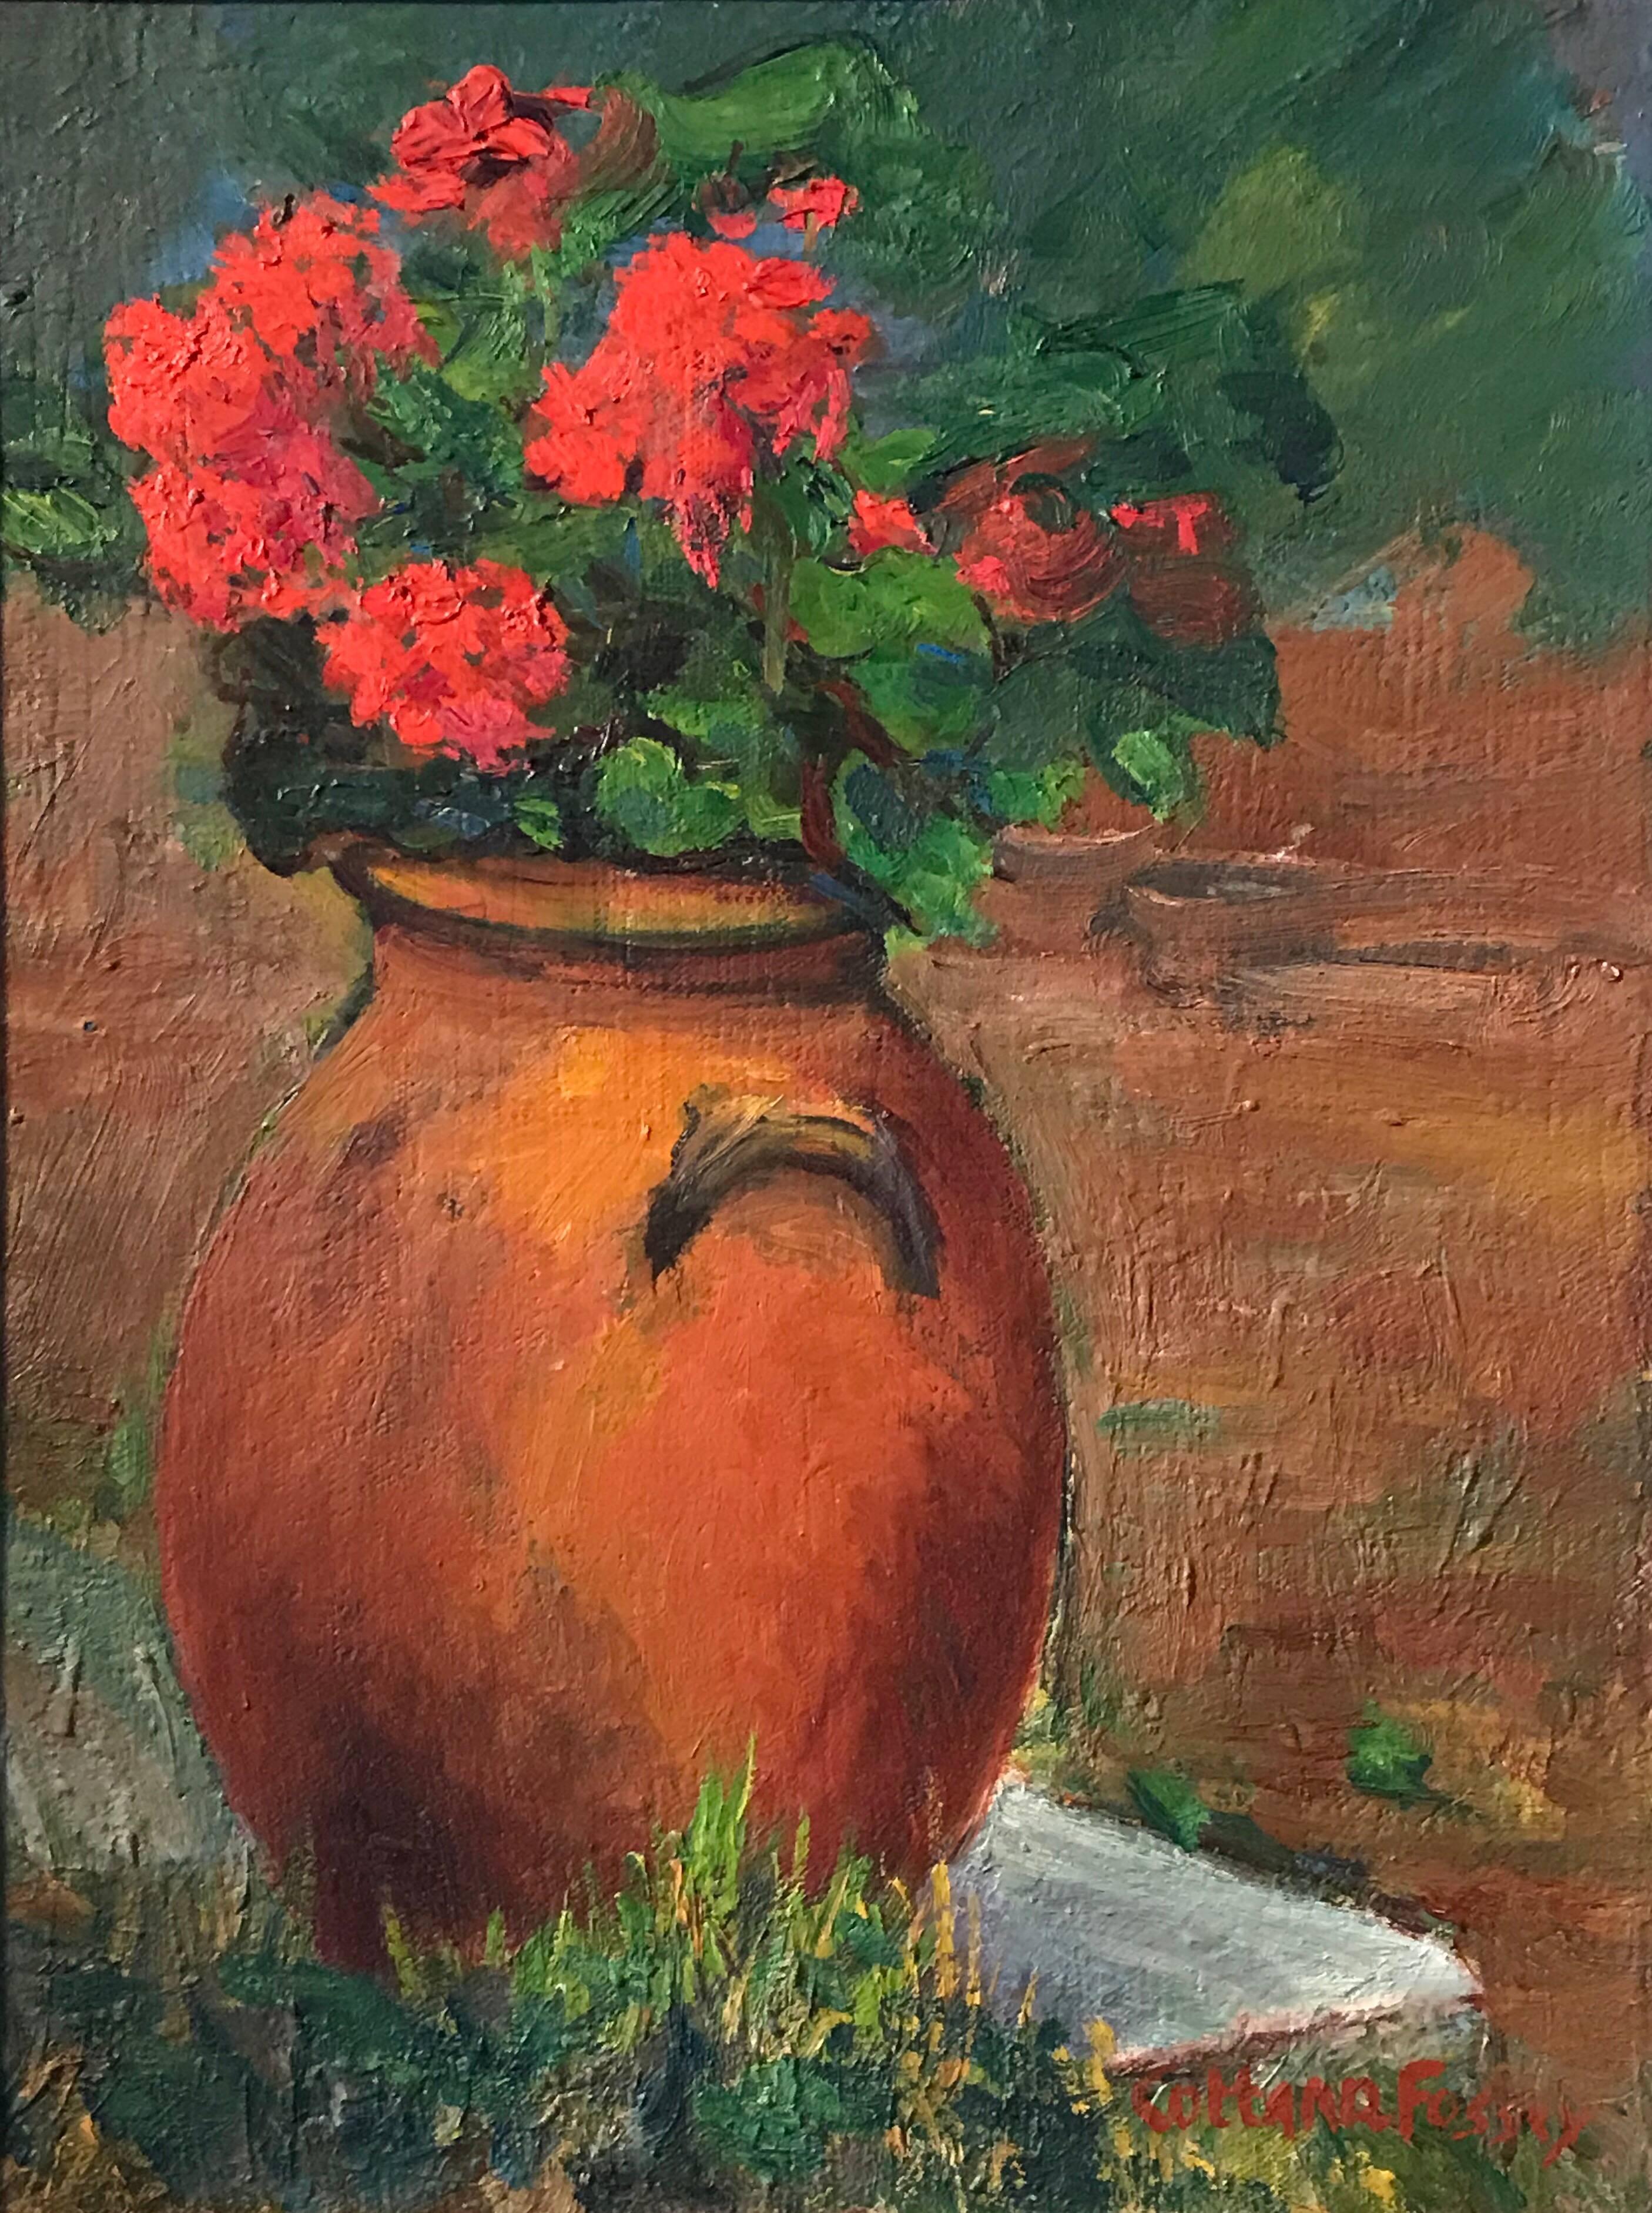 Louise Jeanne Cottard-Fossey Landscape Painting - Flowers in Terracotta Pot - French Impressionist Oil Painting